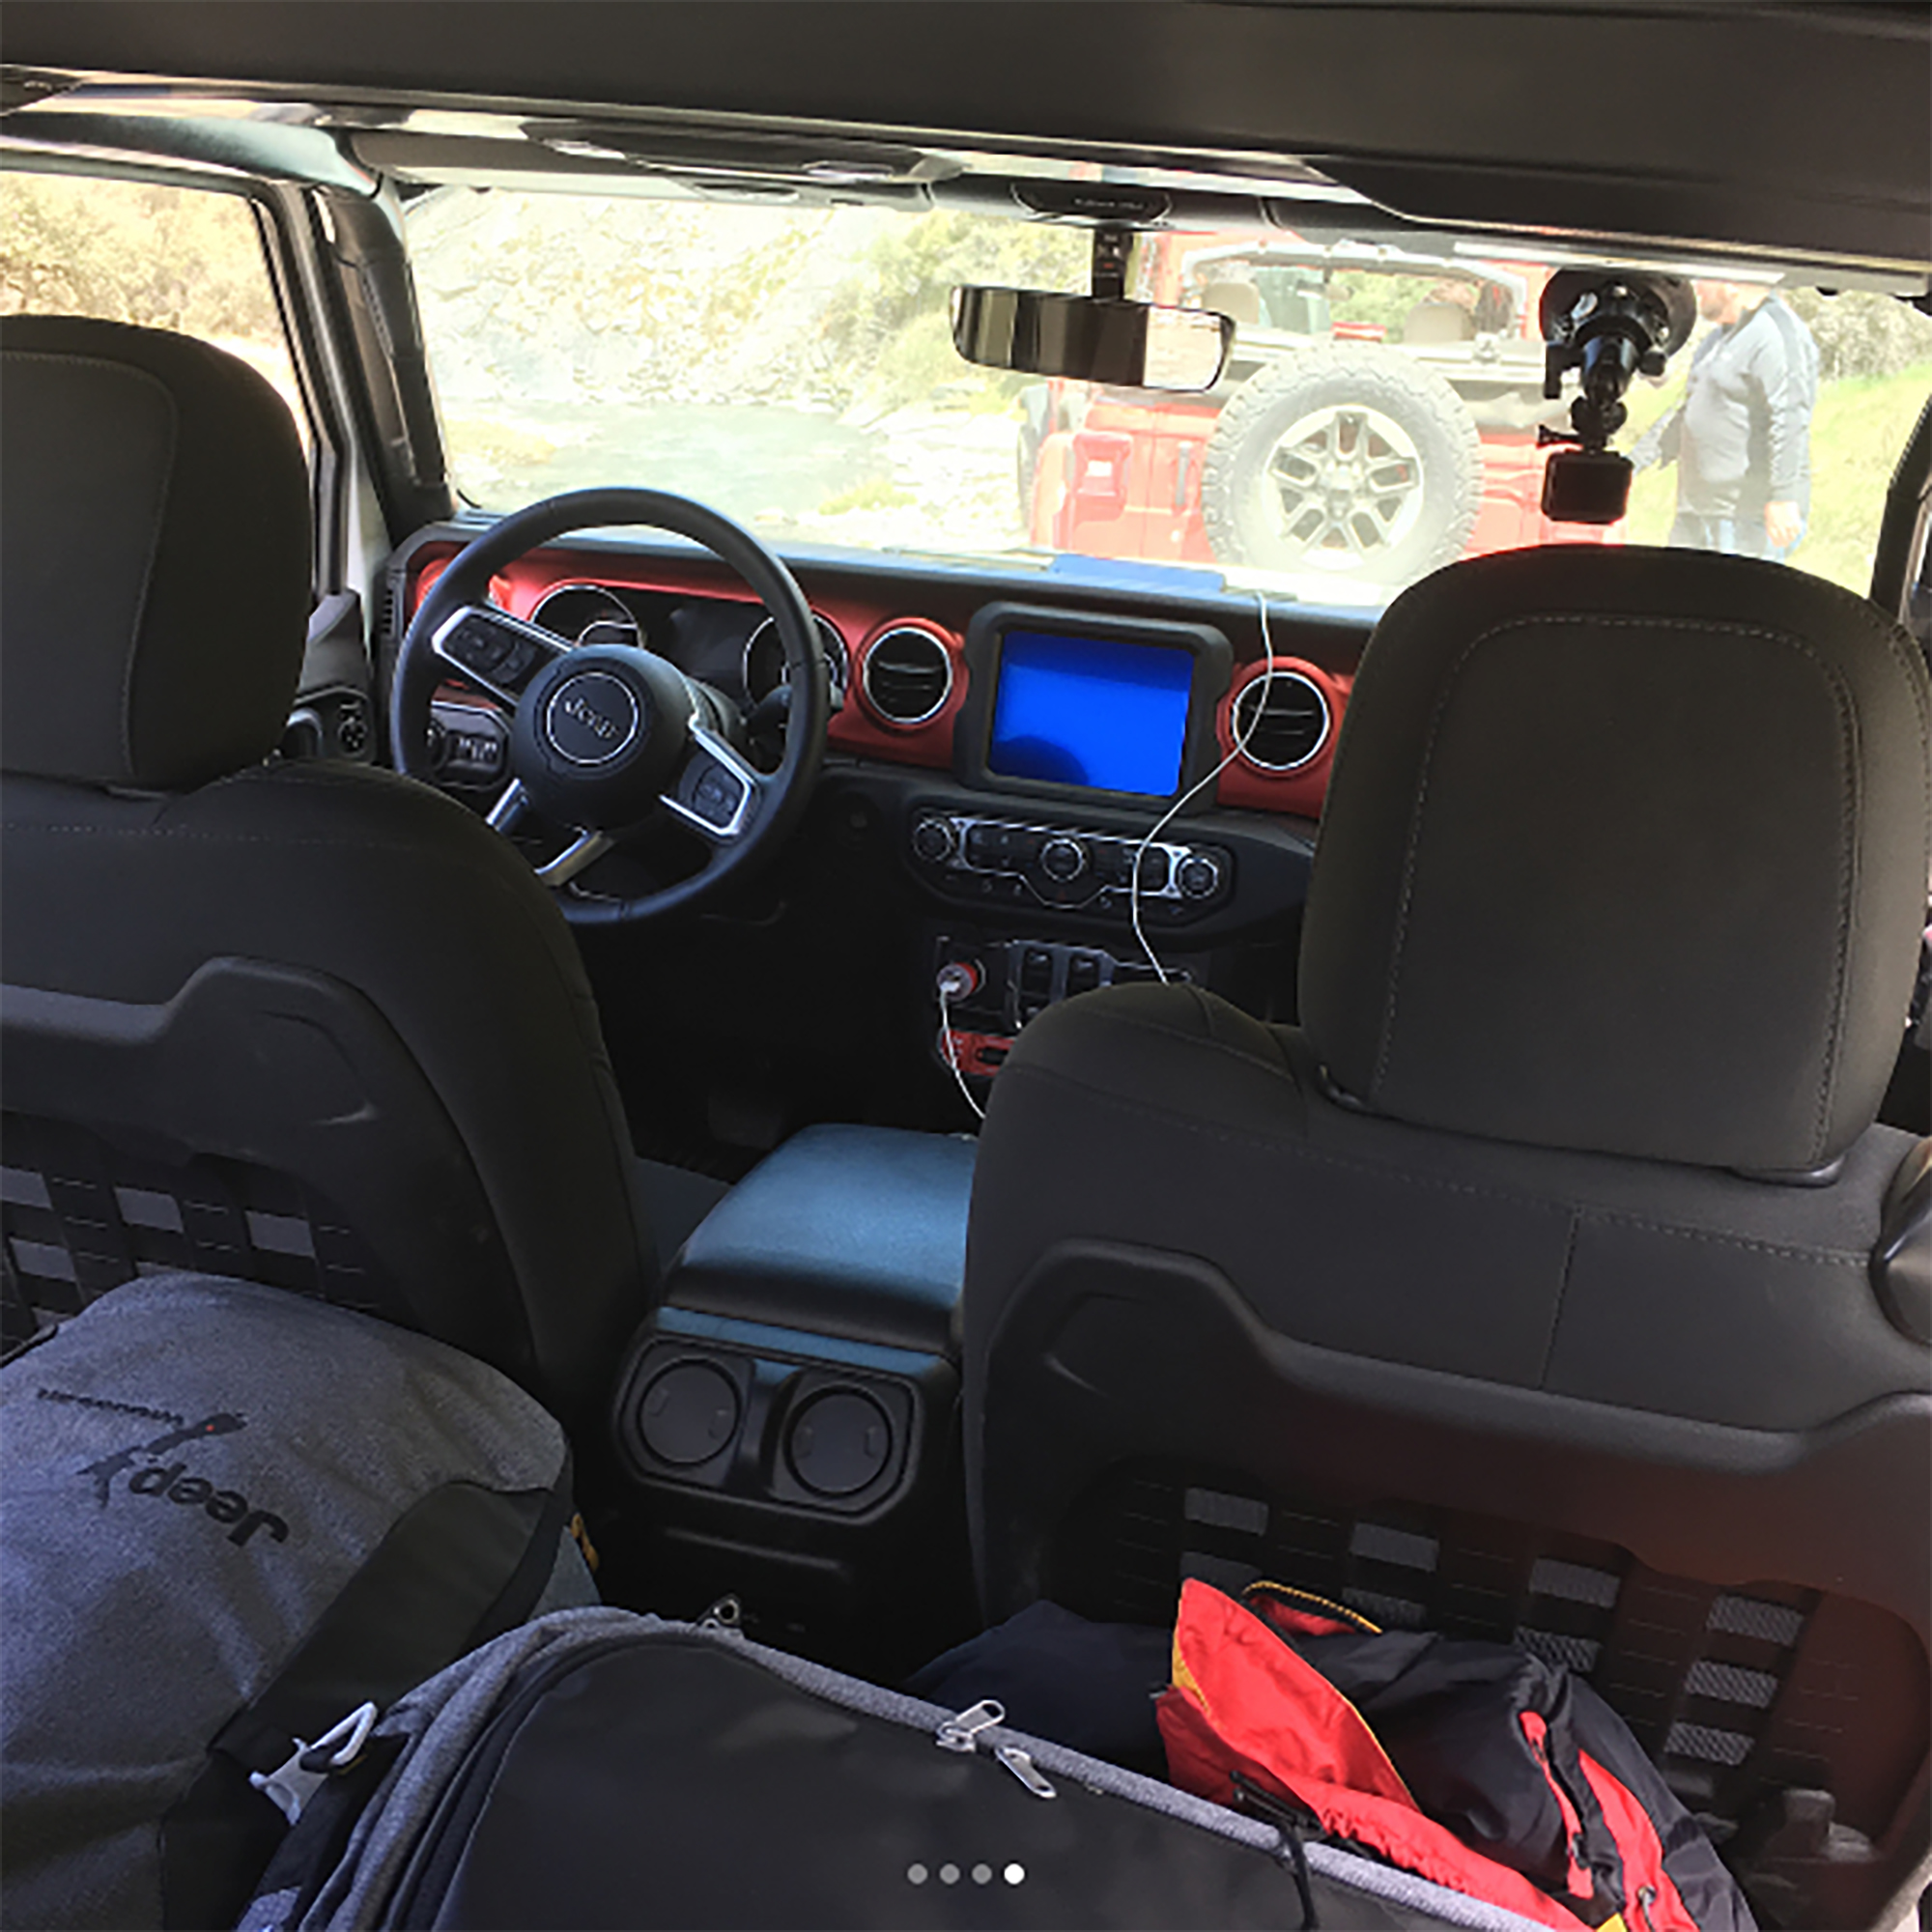 New 2018 JL Wrangler Photos, Cost, Colors And Mileage Ratings | Quadratec